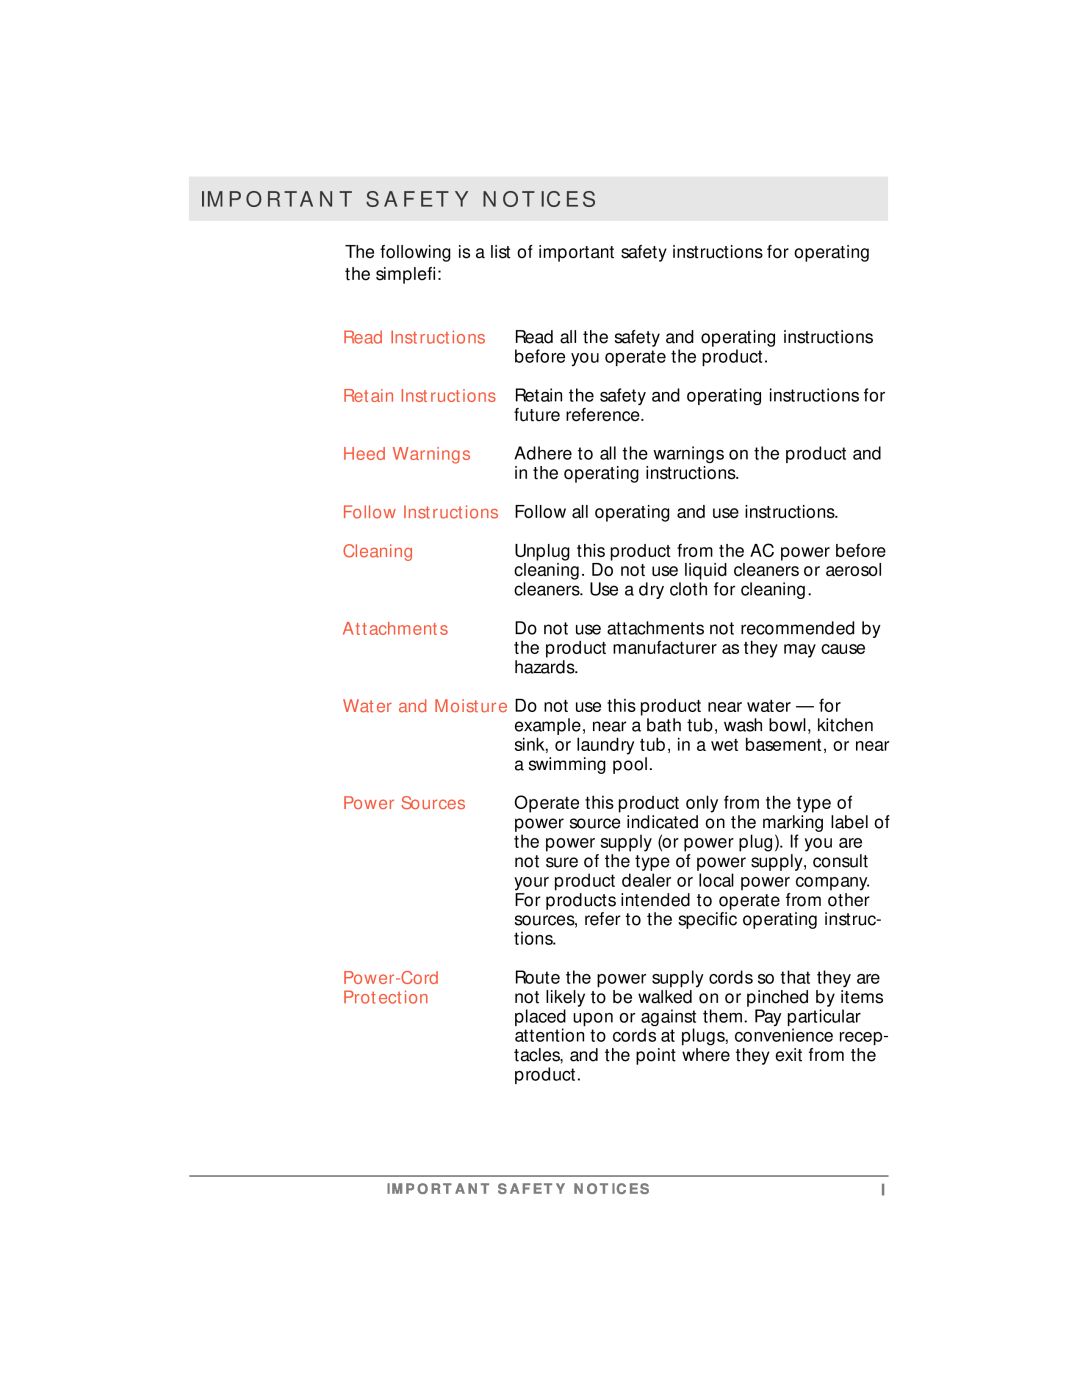 Motorola simplefi manual Important Safety Notices, Read Instructions Retain Instructions, Power-CordProtection 